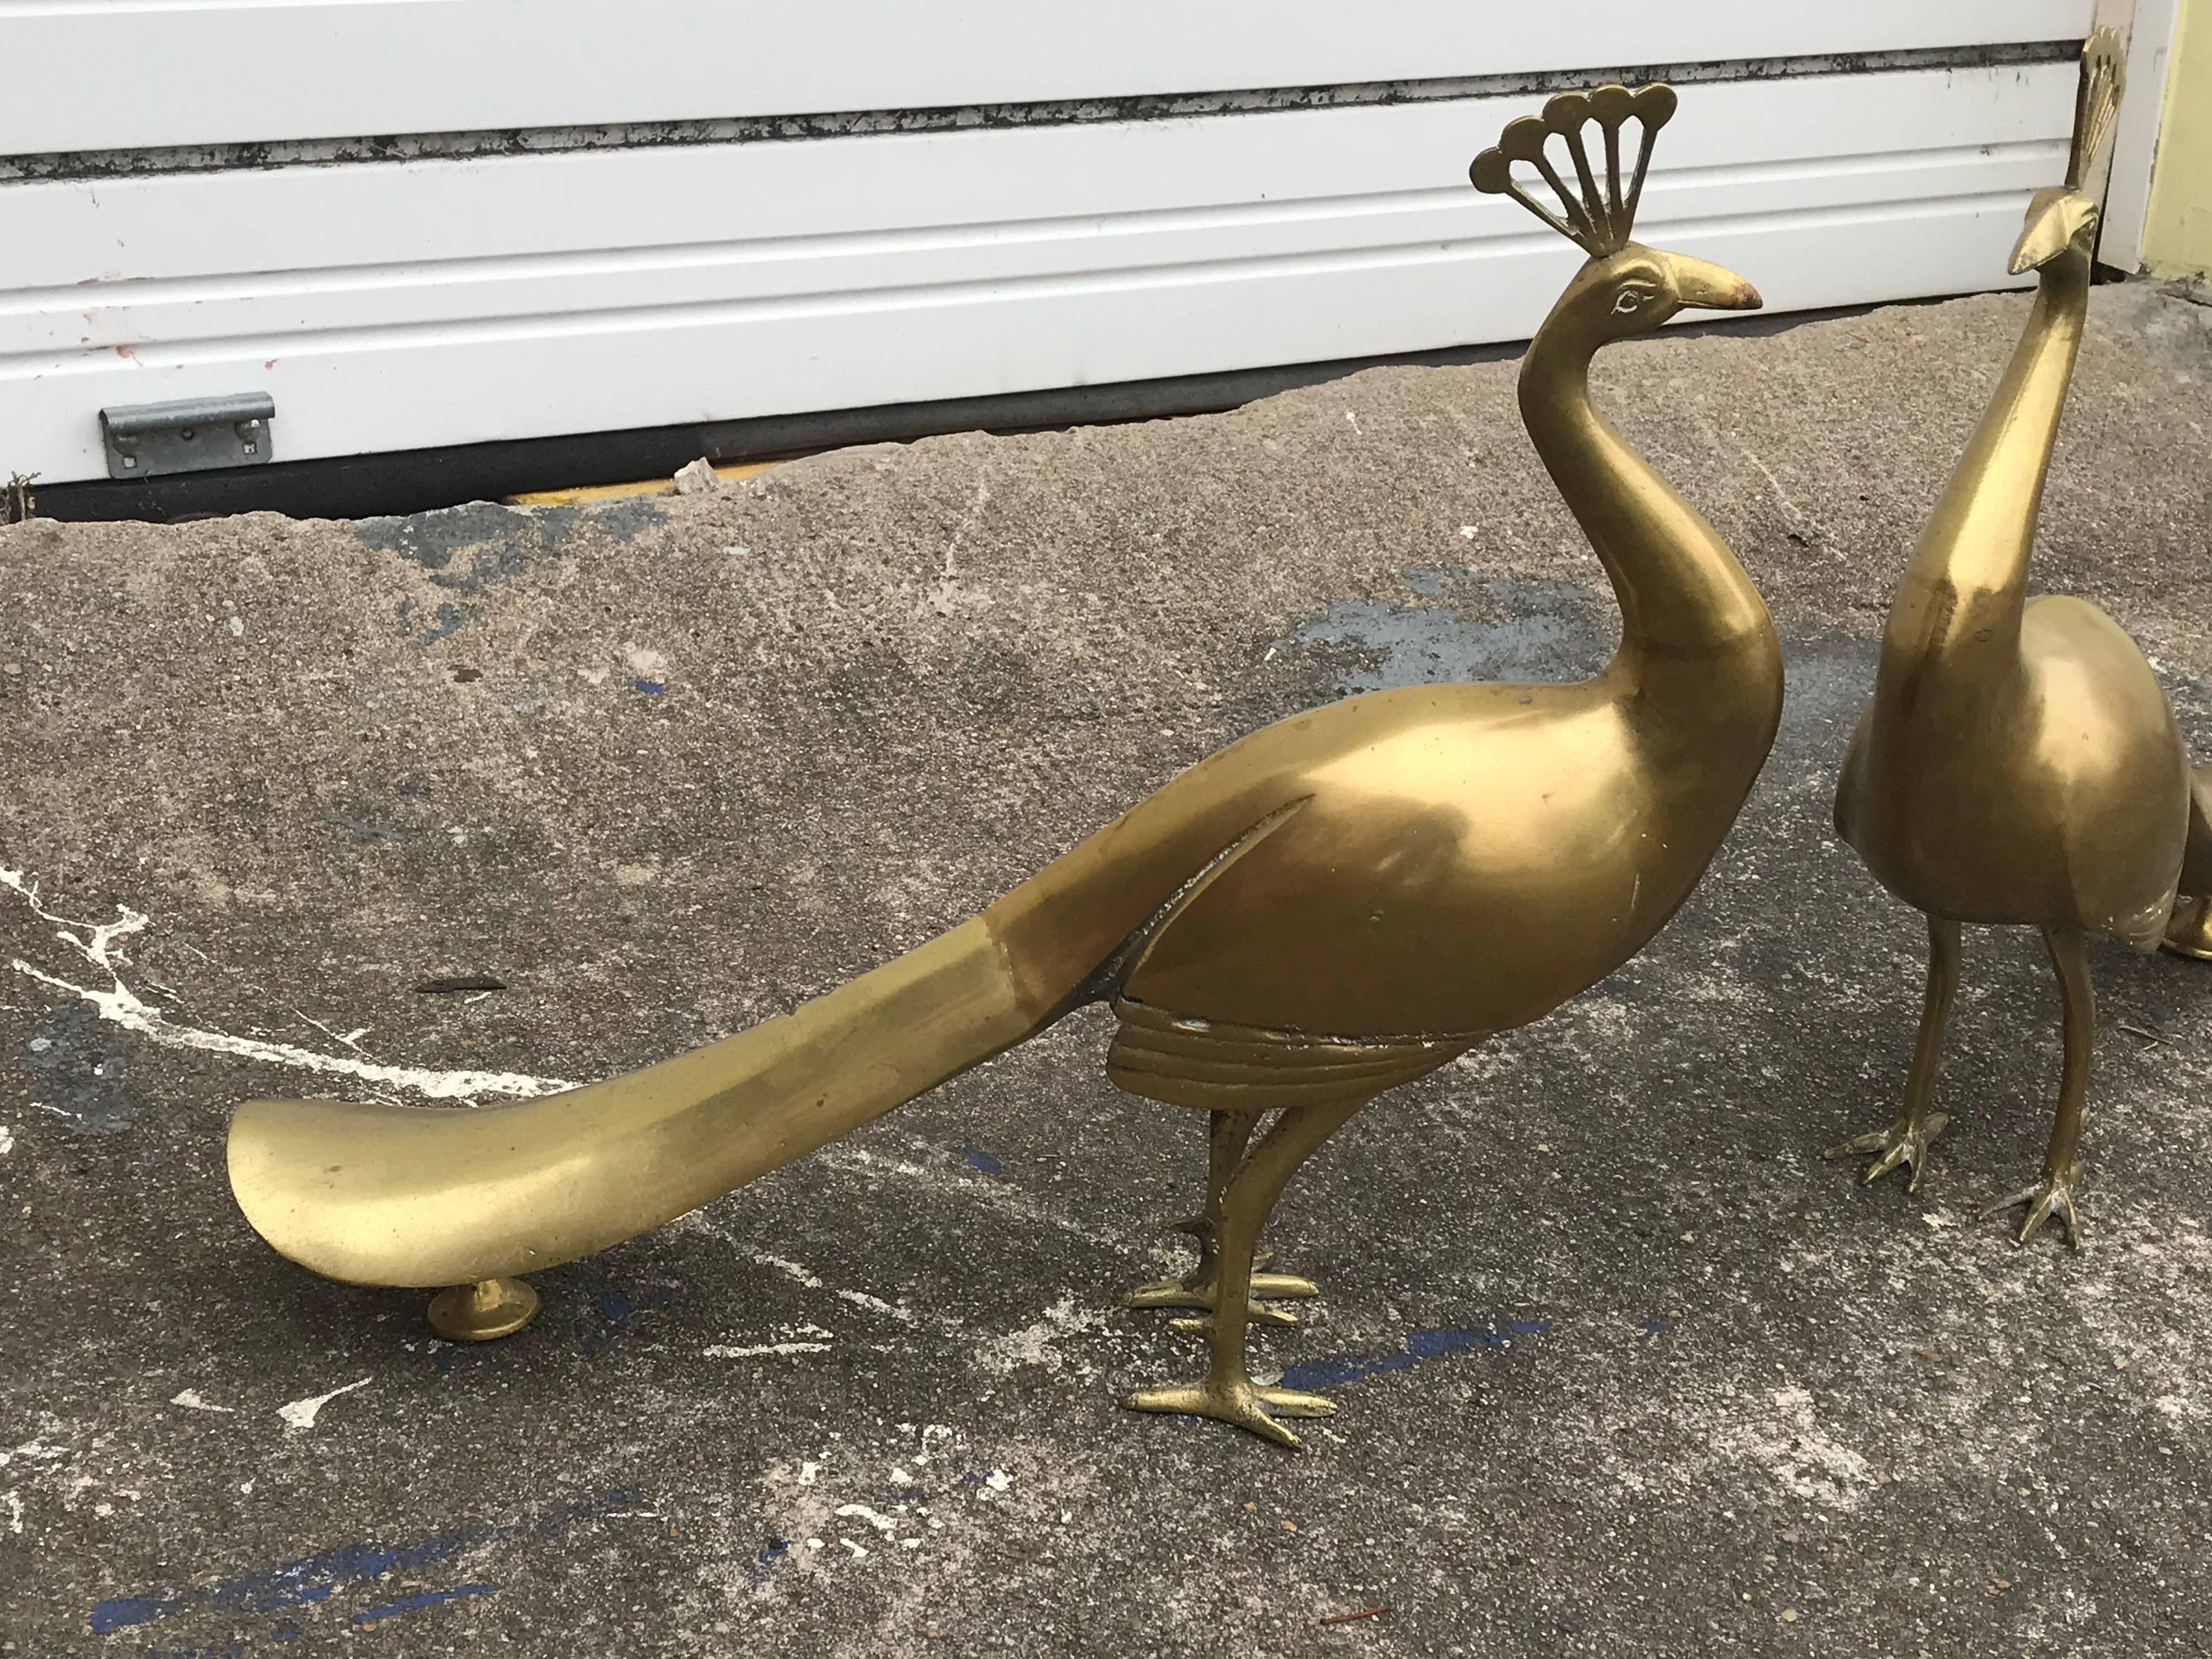 Offered is a stunning, pair of large, 1960s Italian brass peacock sculptures, in the style of Sergio Bustamante. Heavy. They would look fabulous flanking a mantle, fireplace, or entryway.